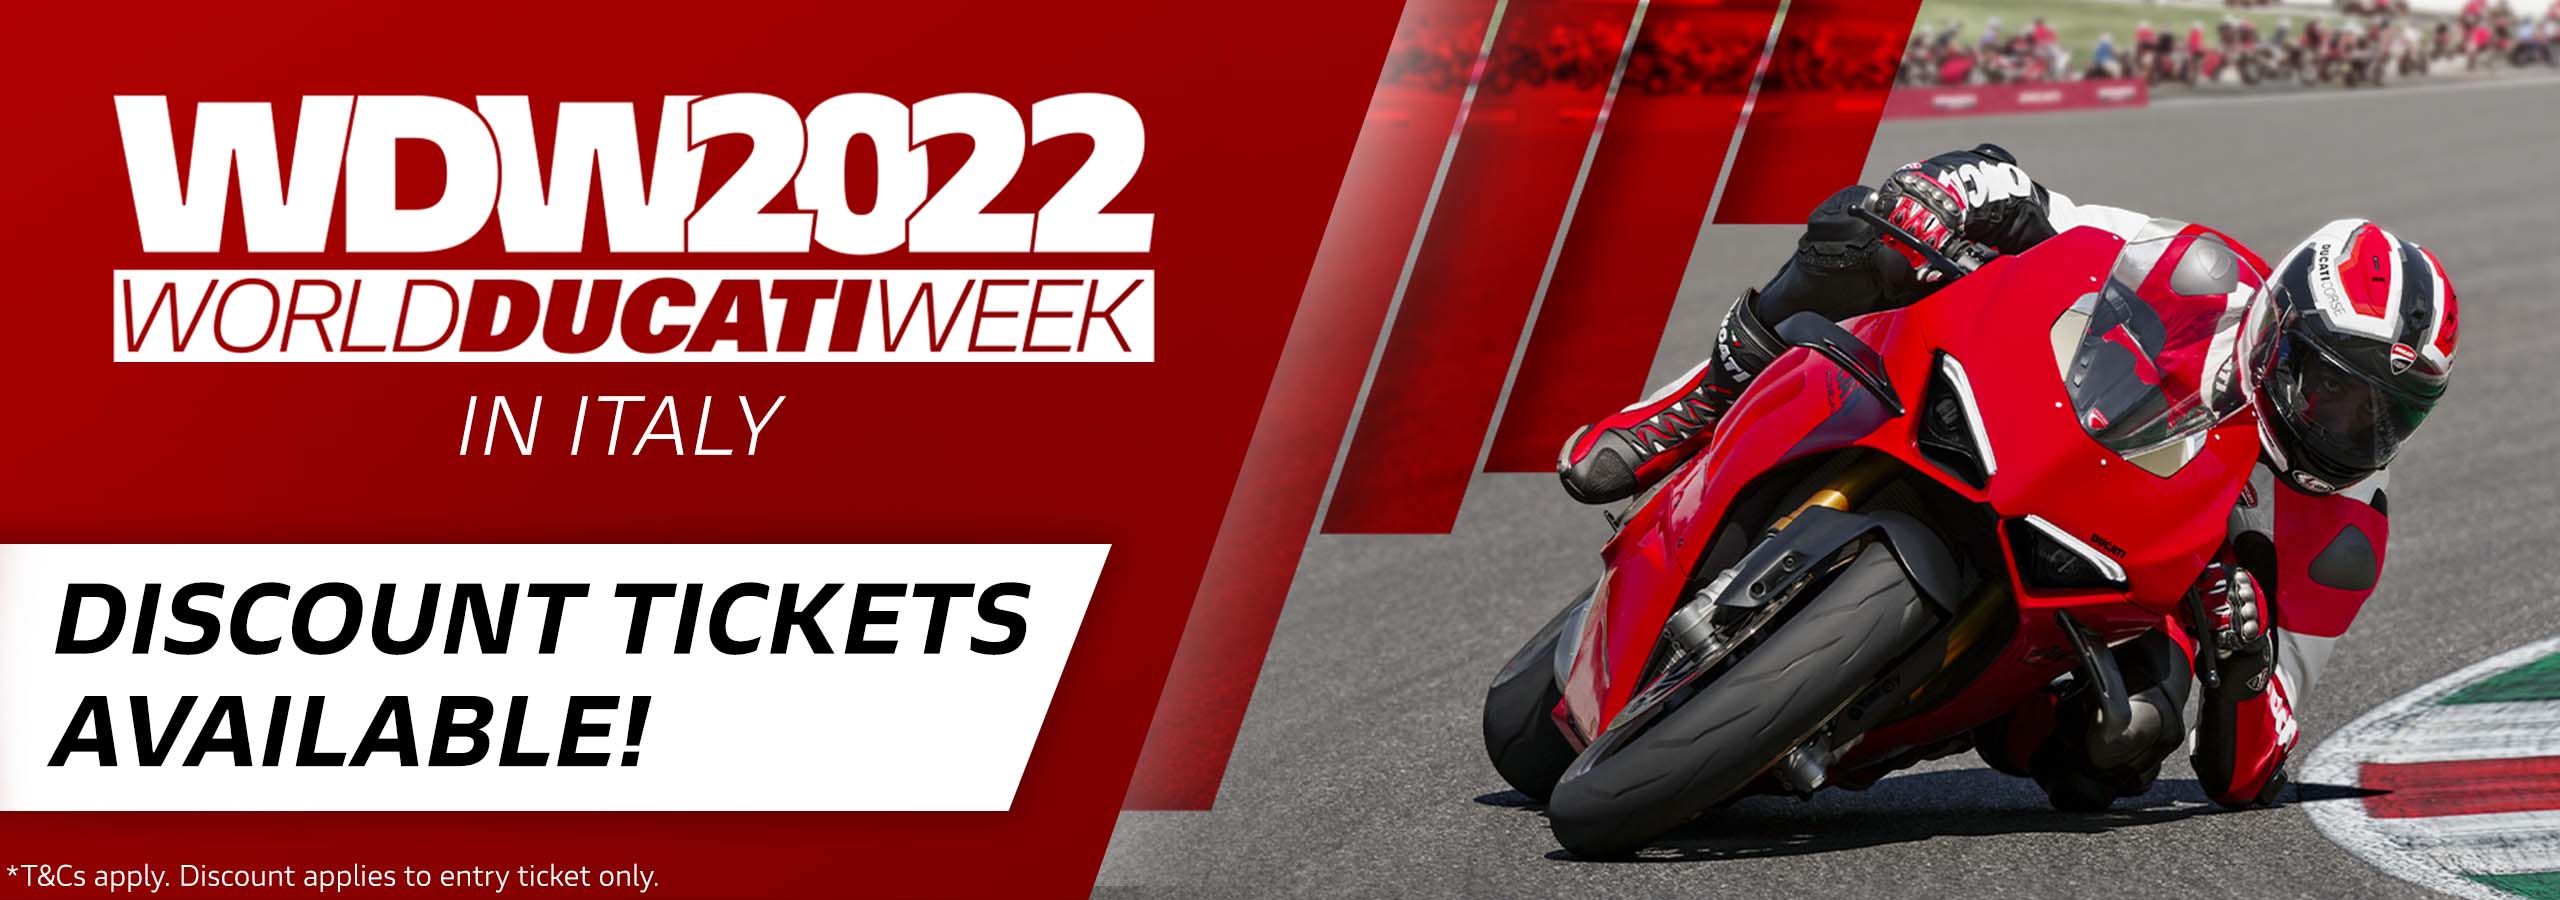 Get your World Ducati Week discount ticket code from us